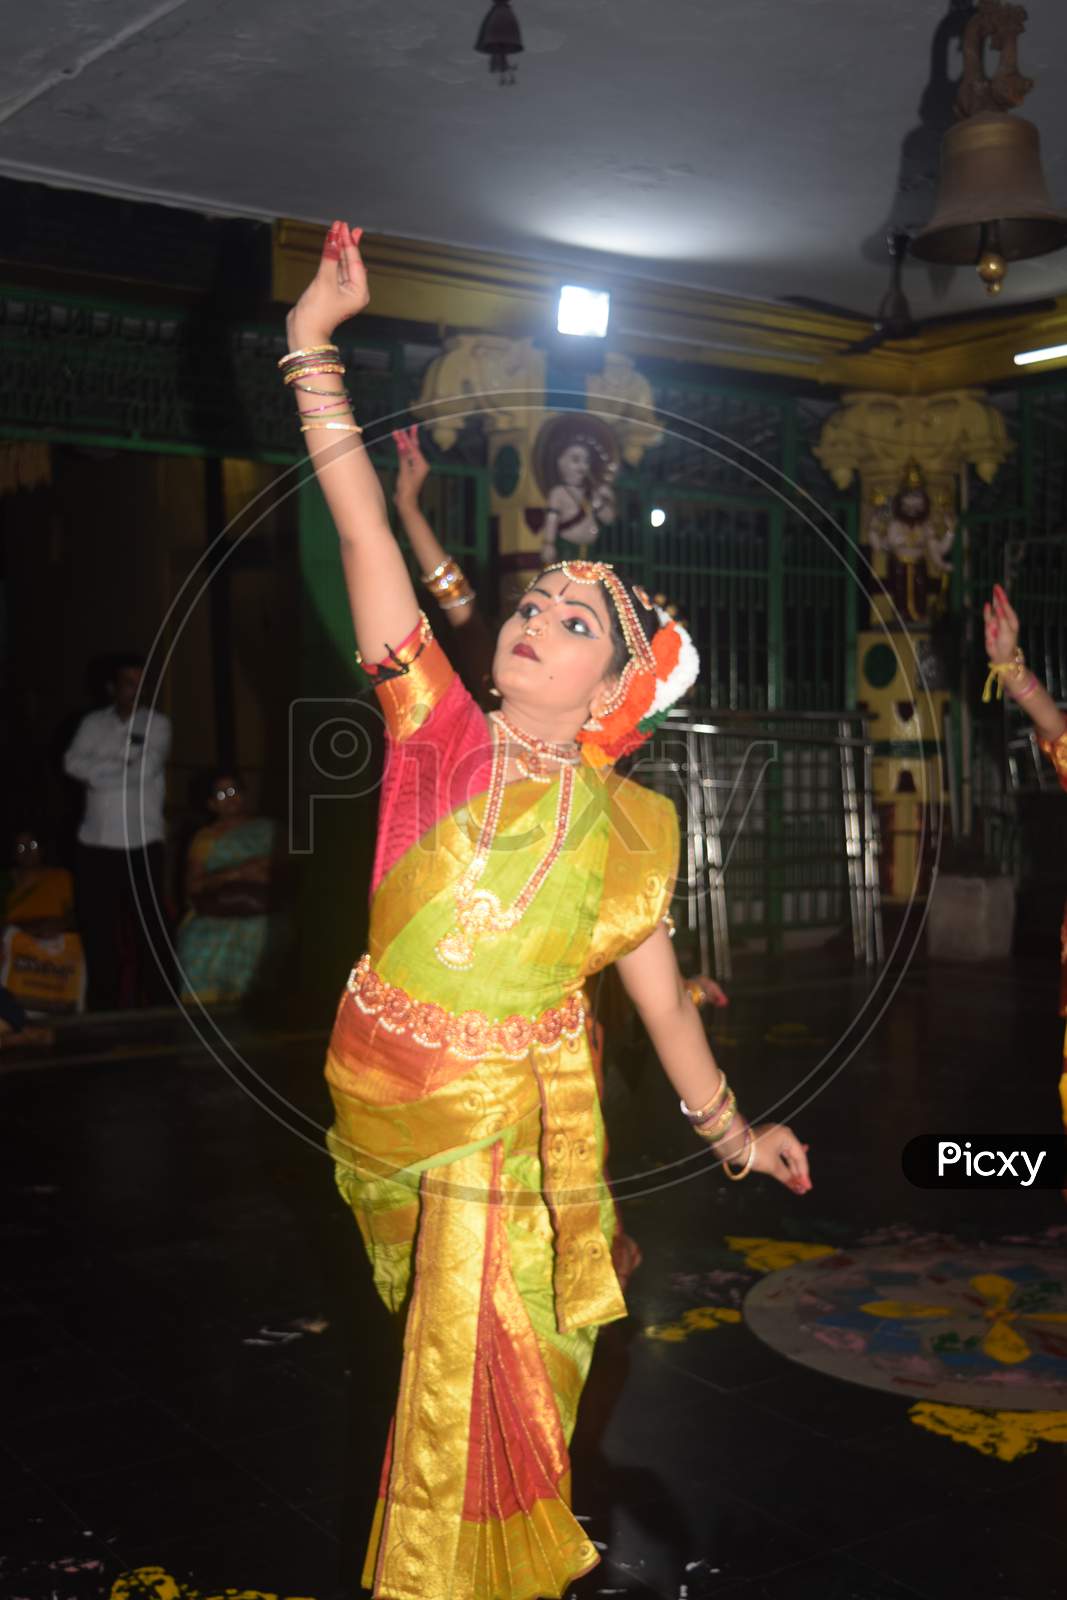 Students learning Classical Dance